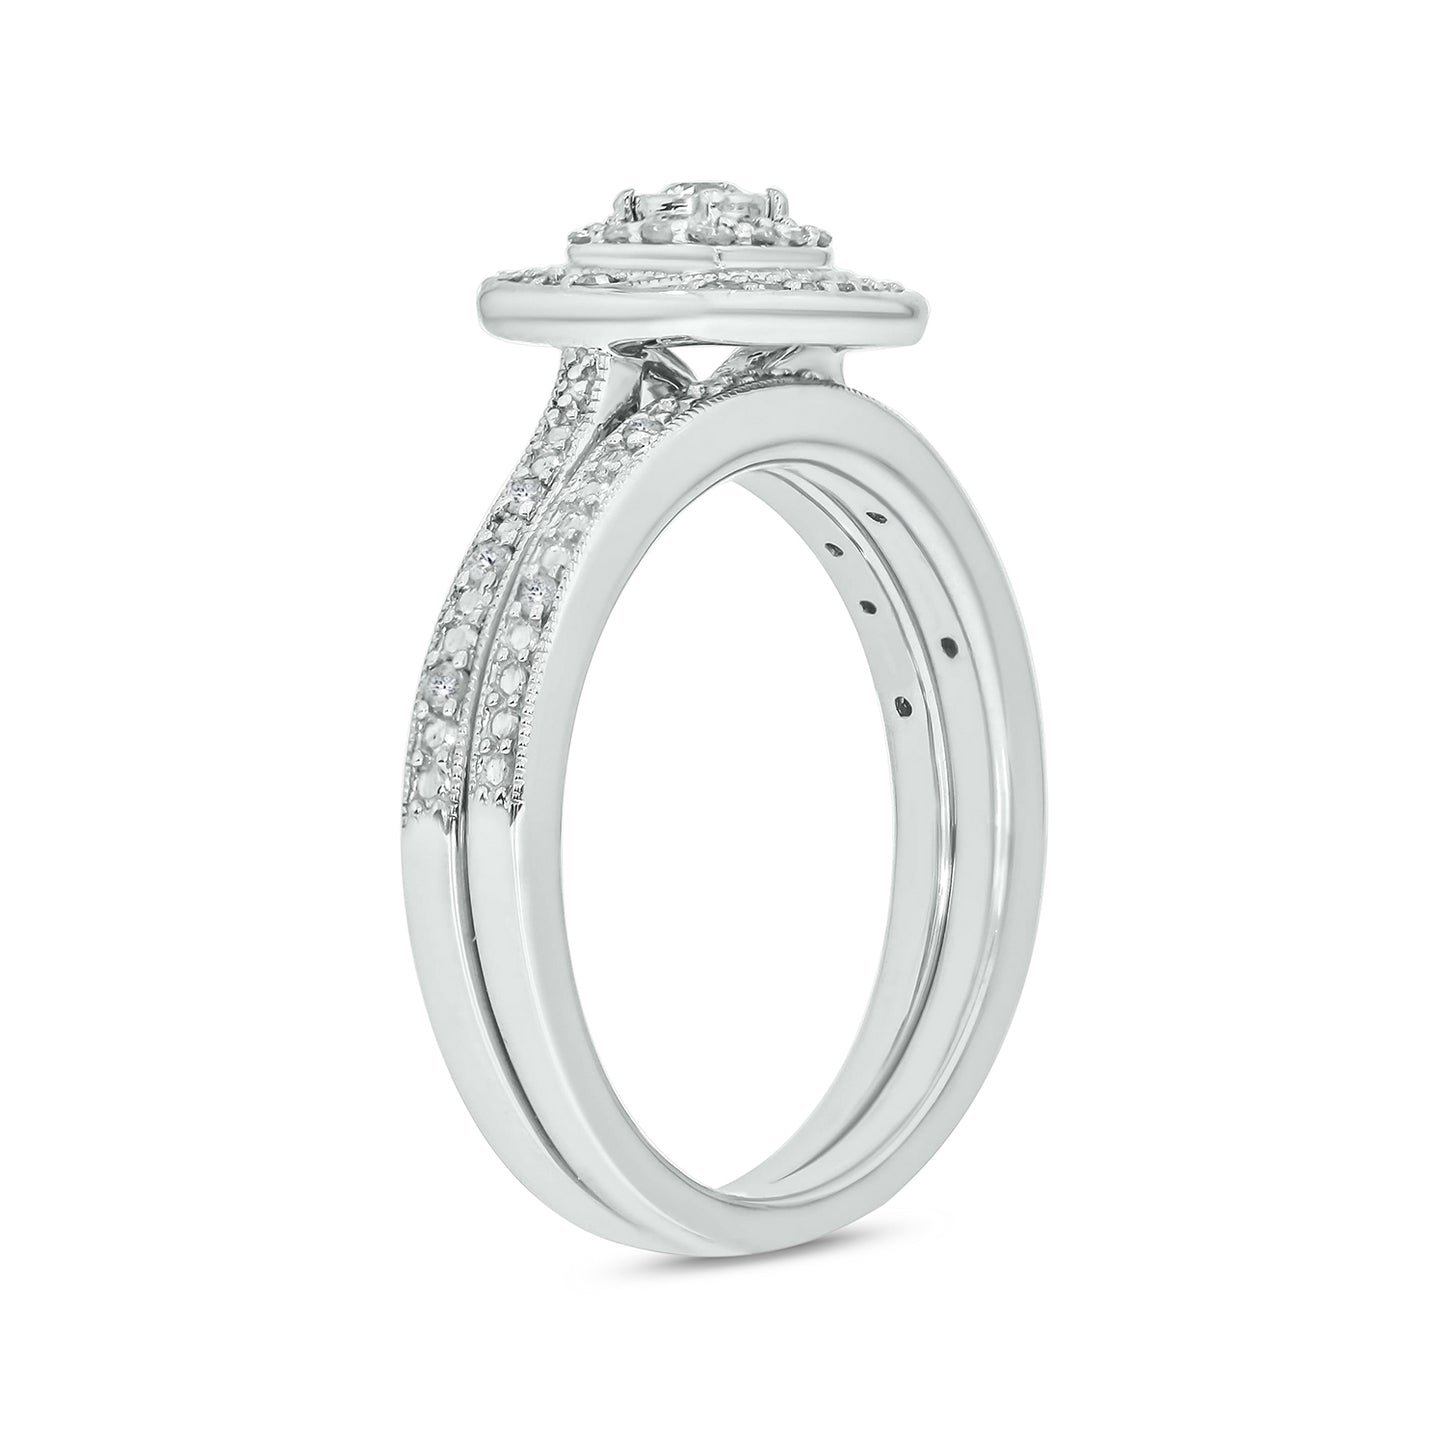 Luxurious Cushion Bridal Ring Set in 925 Sterling Silver & Natural Diamonds